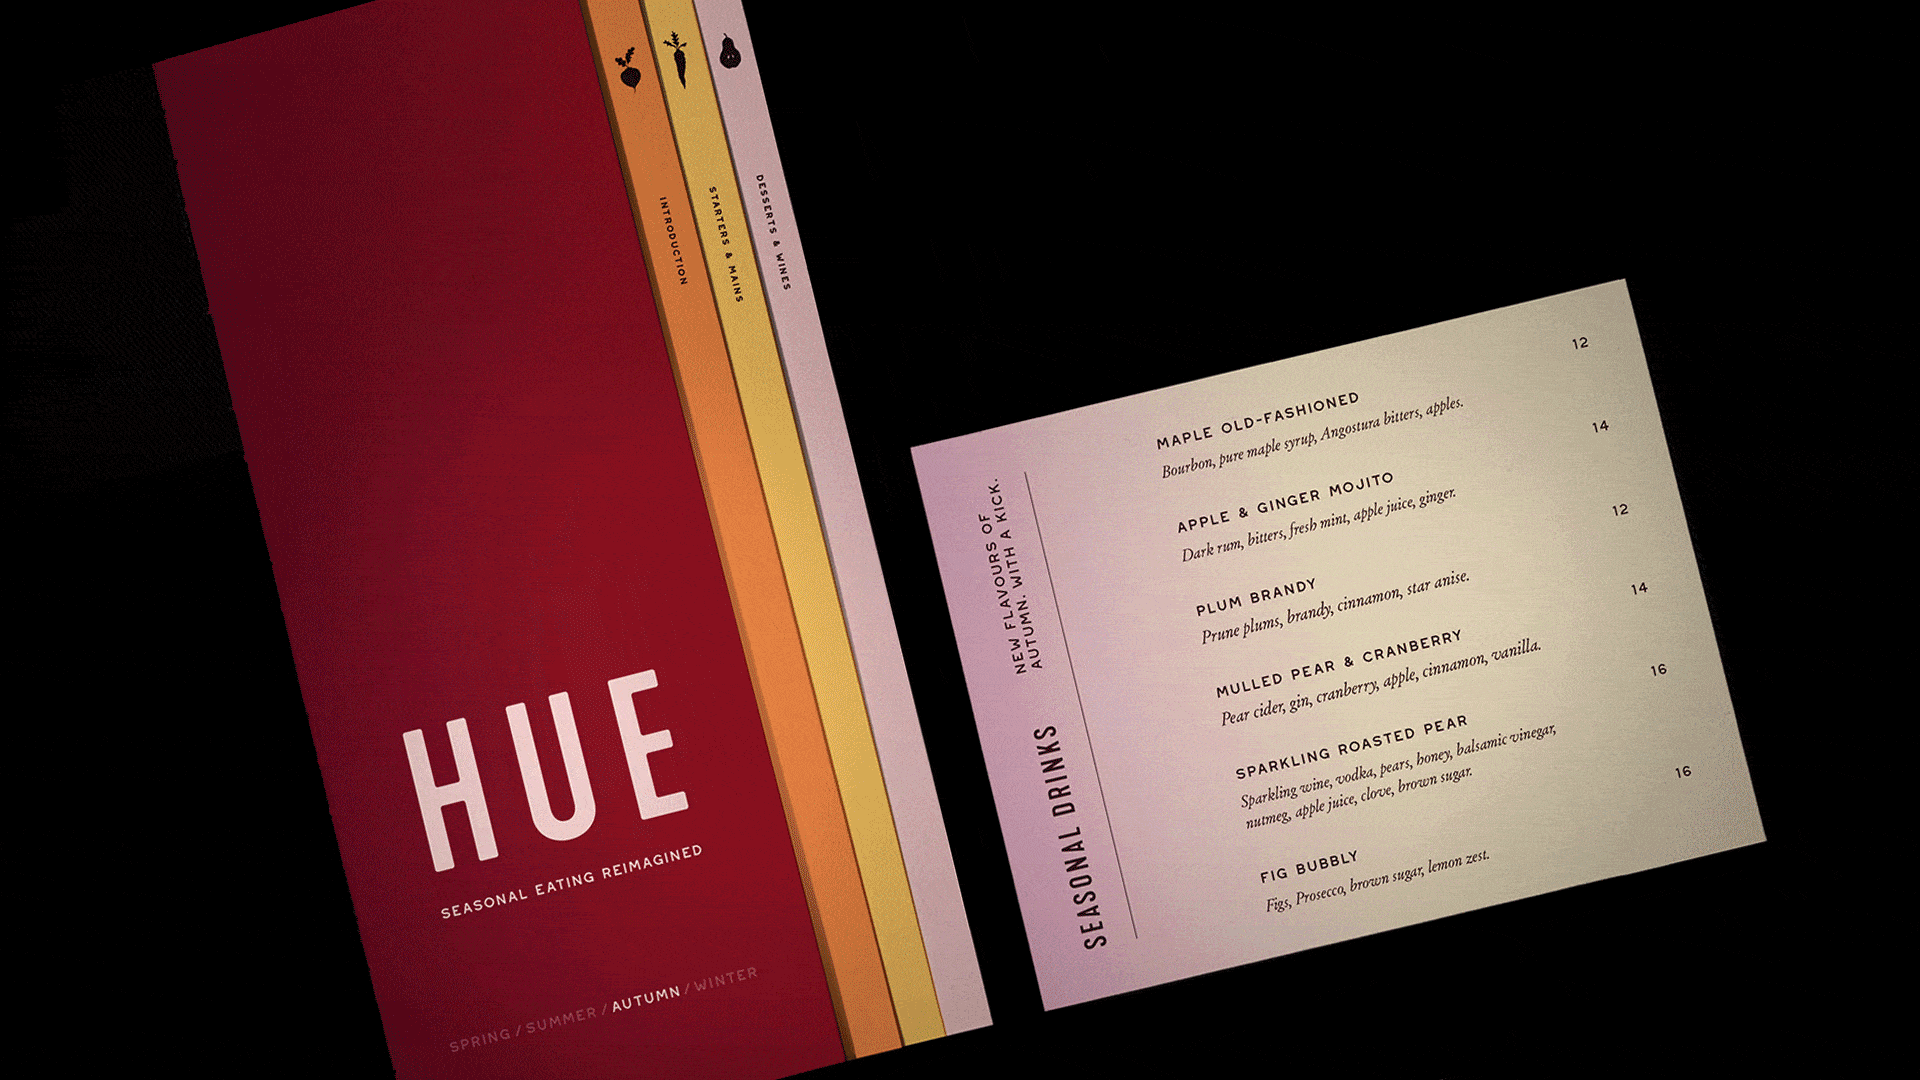 gif of 3 images, displaying a preview of the Hue menu, packaging, and cookbook